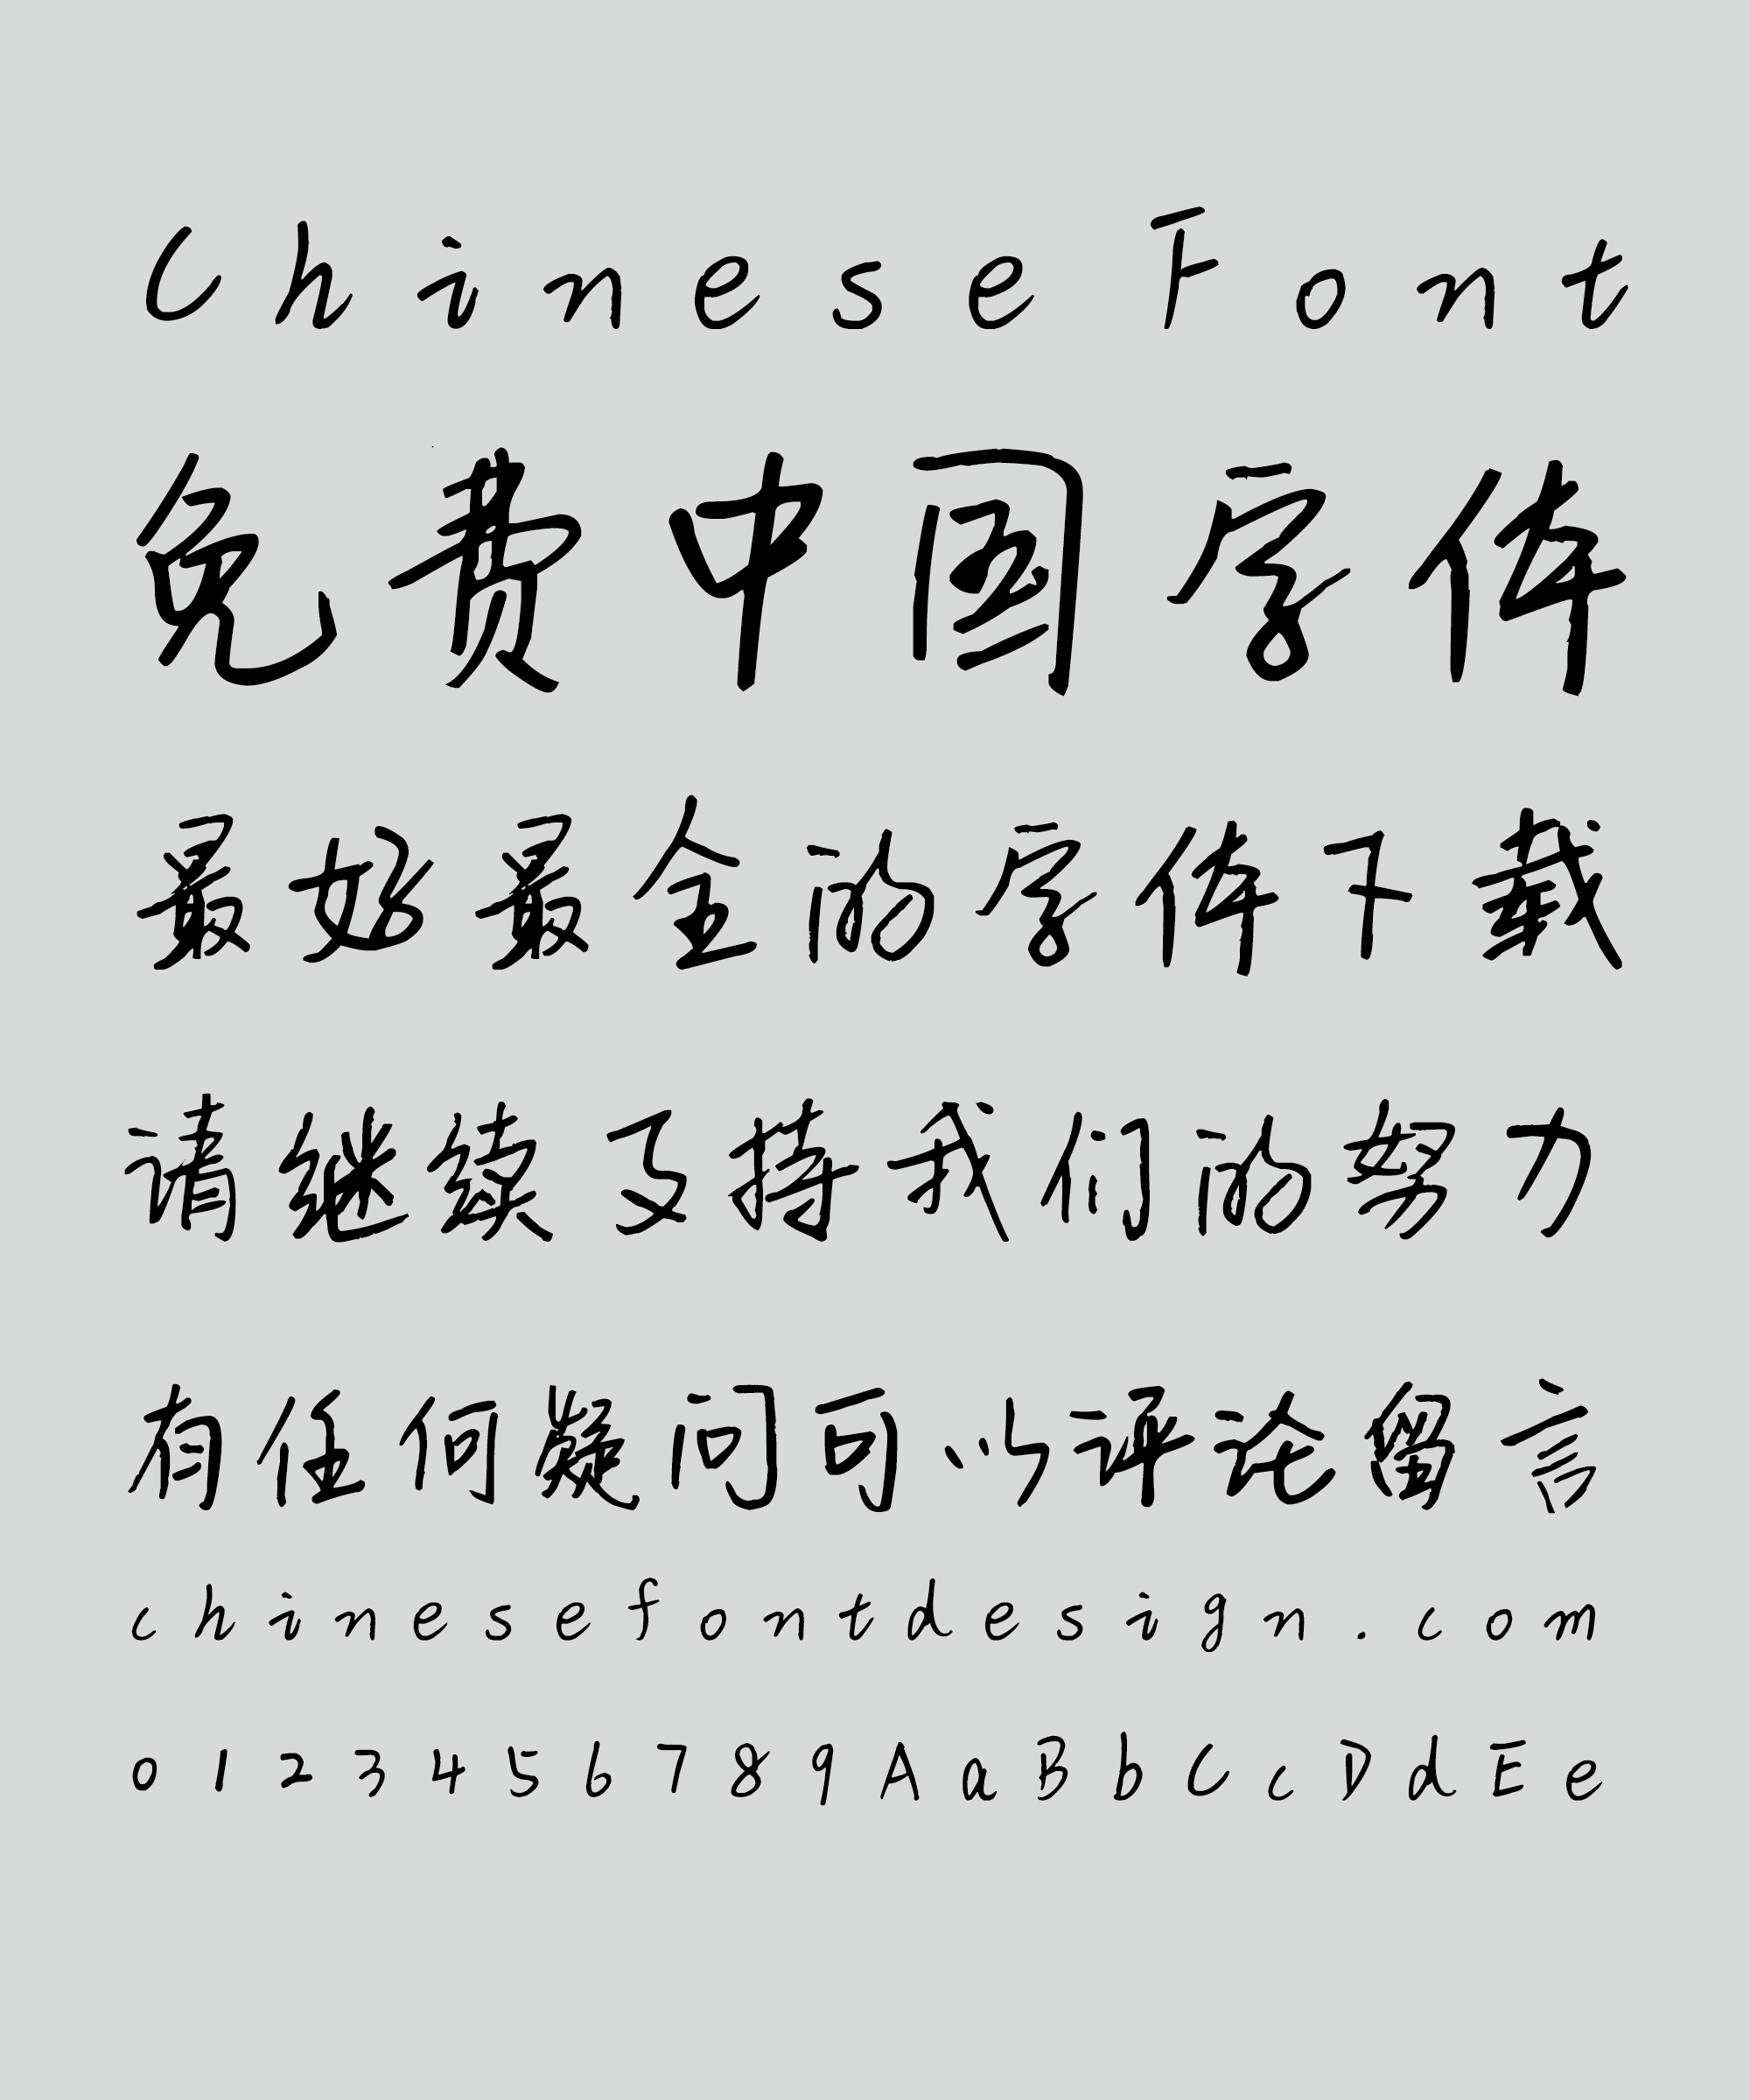 photoshop chinese font download